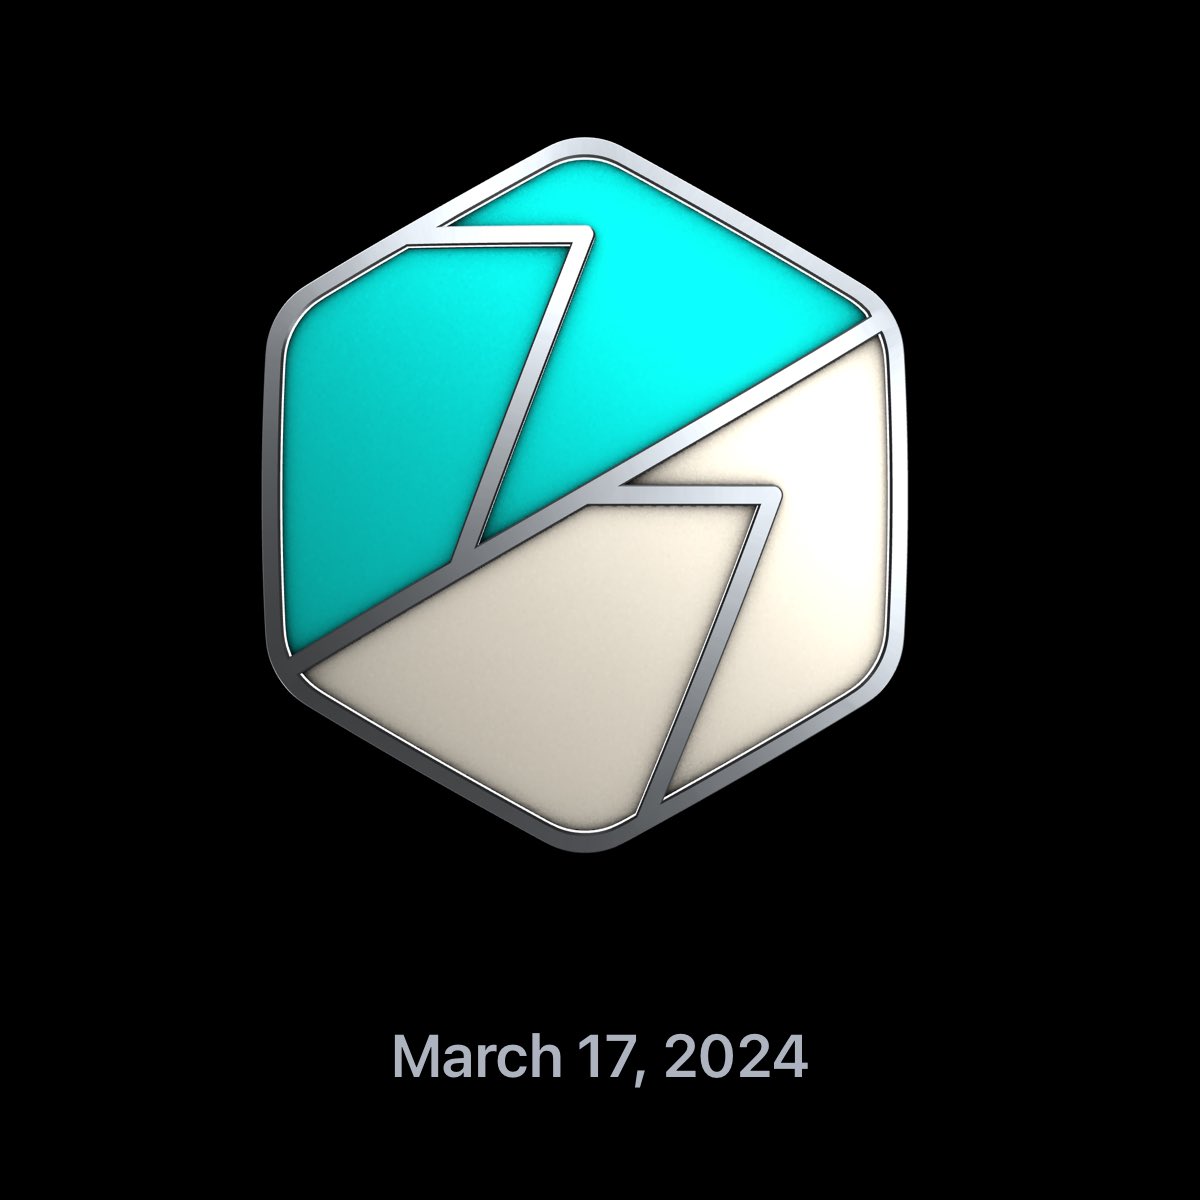 I reached my Stand goal every day during the week of March 17 on my #AppleWatch.